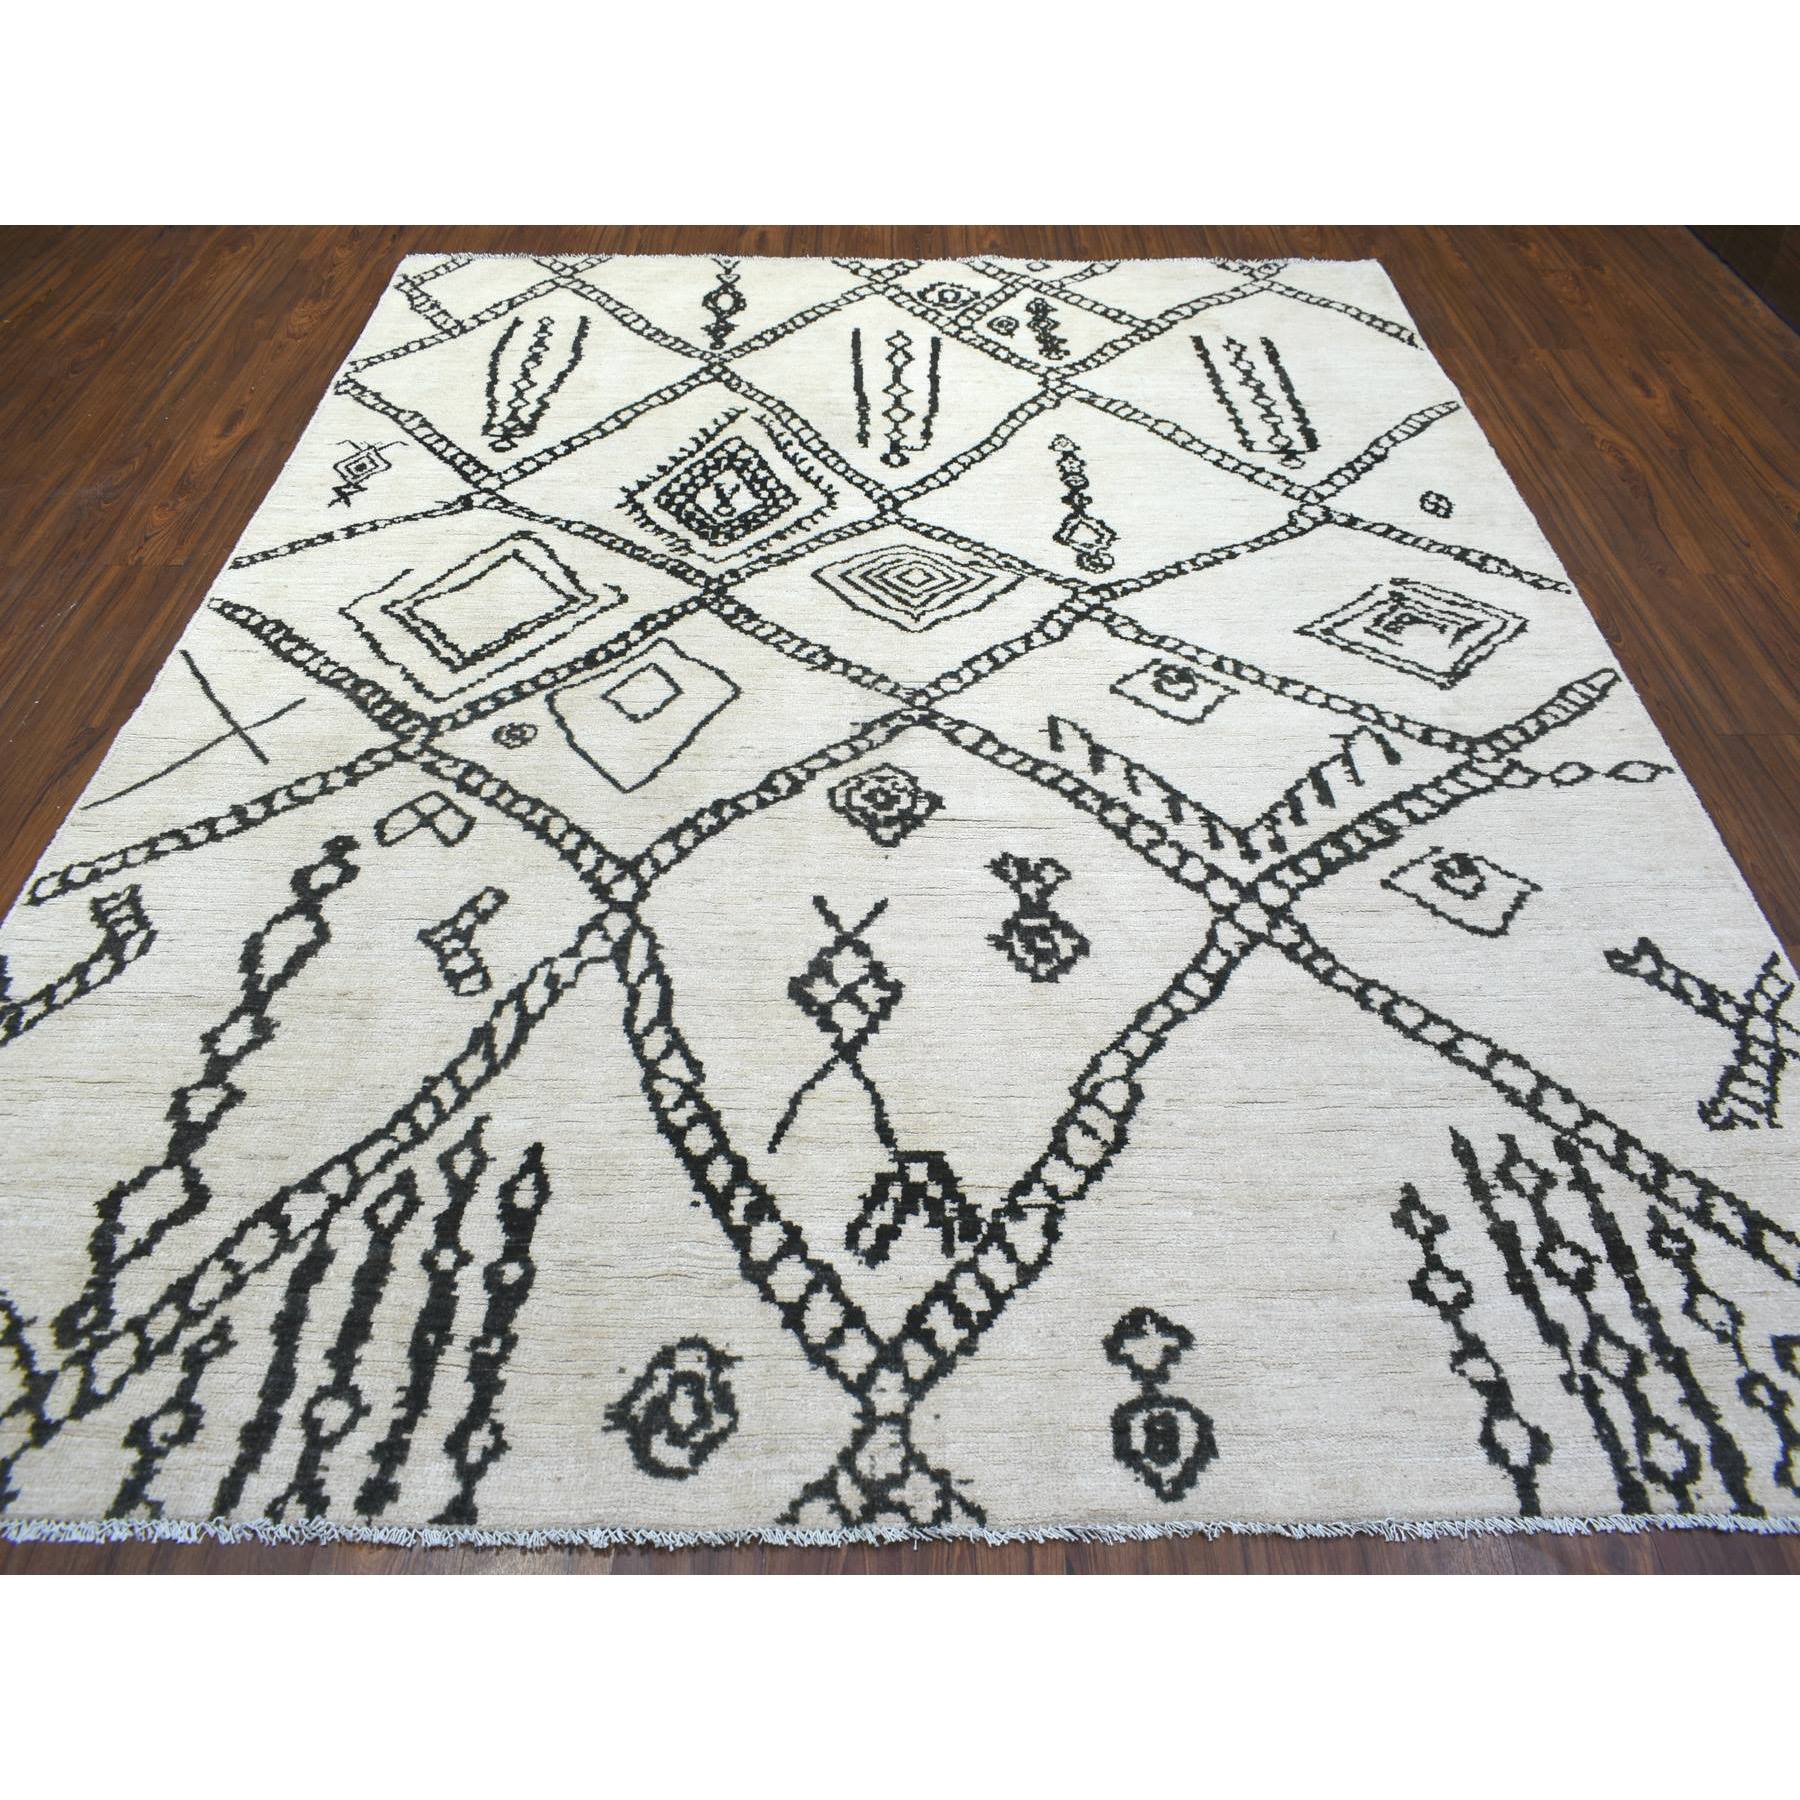 8'4"x10' Ivory, Hand Woven, Soft and Shiny Wool, Boujaad Moroccan Berber with Criss Cross Pattern, Natural Dyes, Oriental Rug 